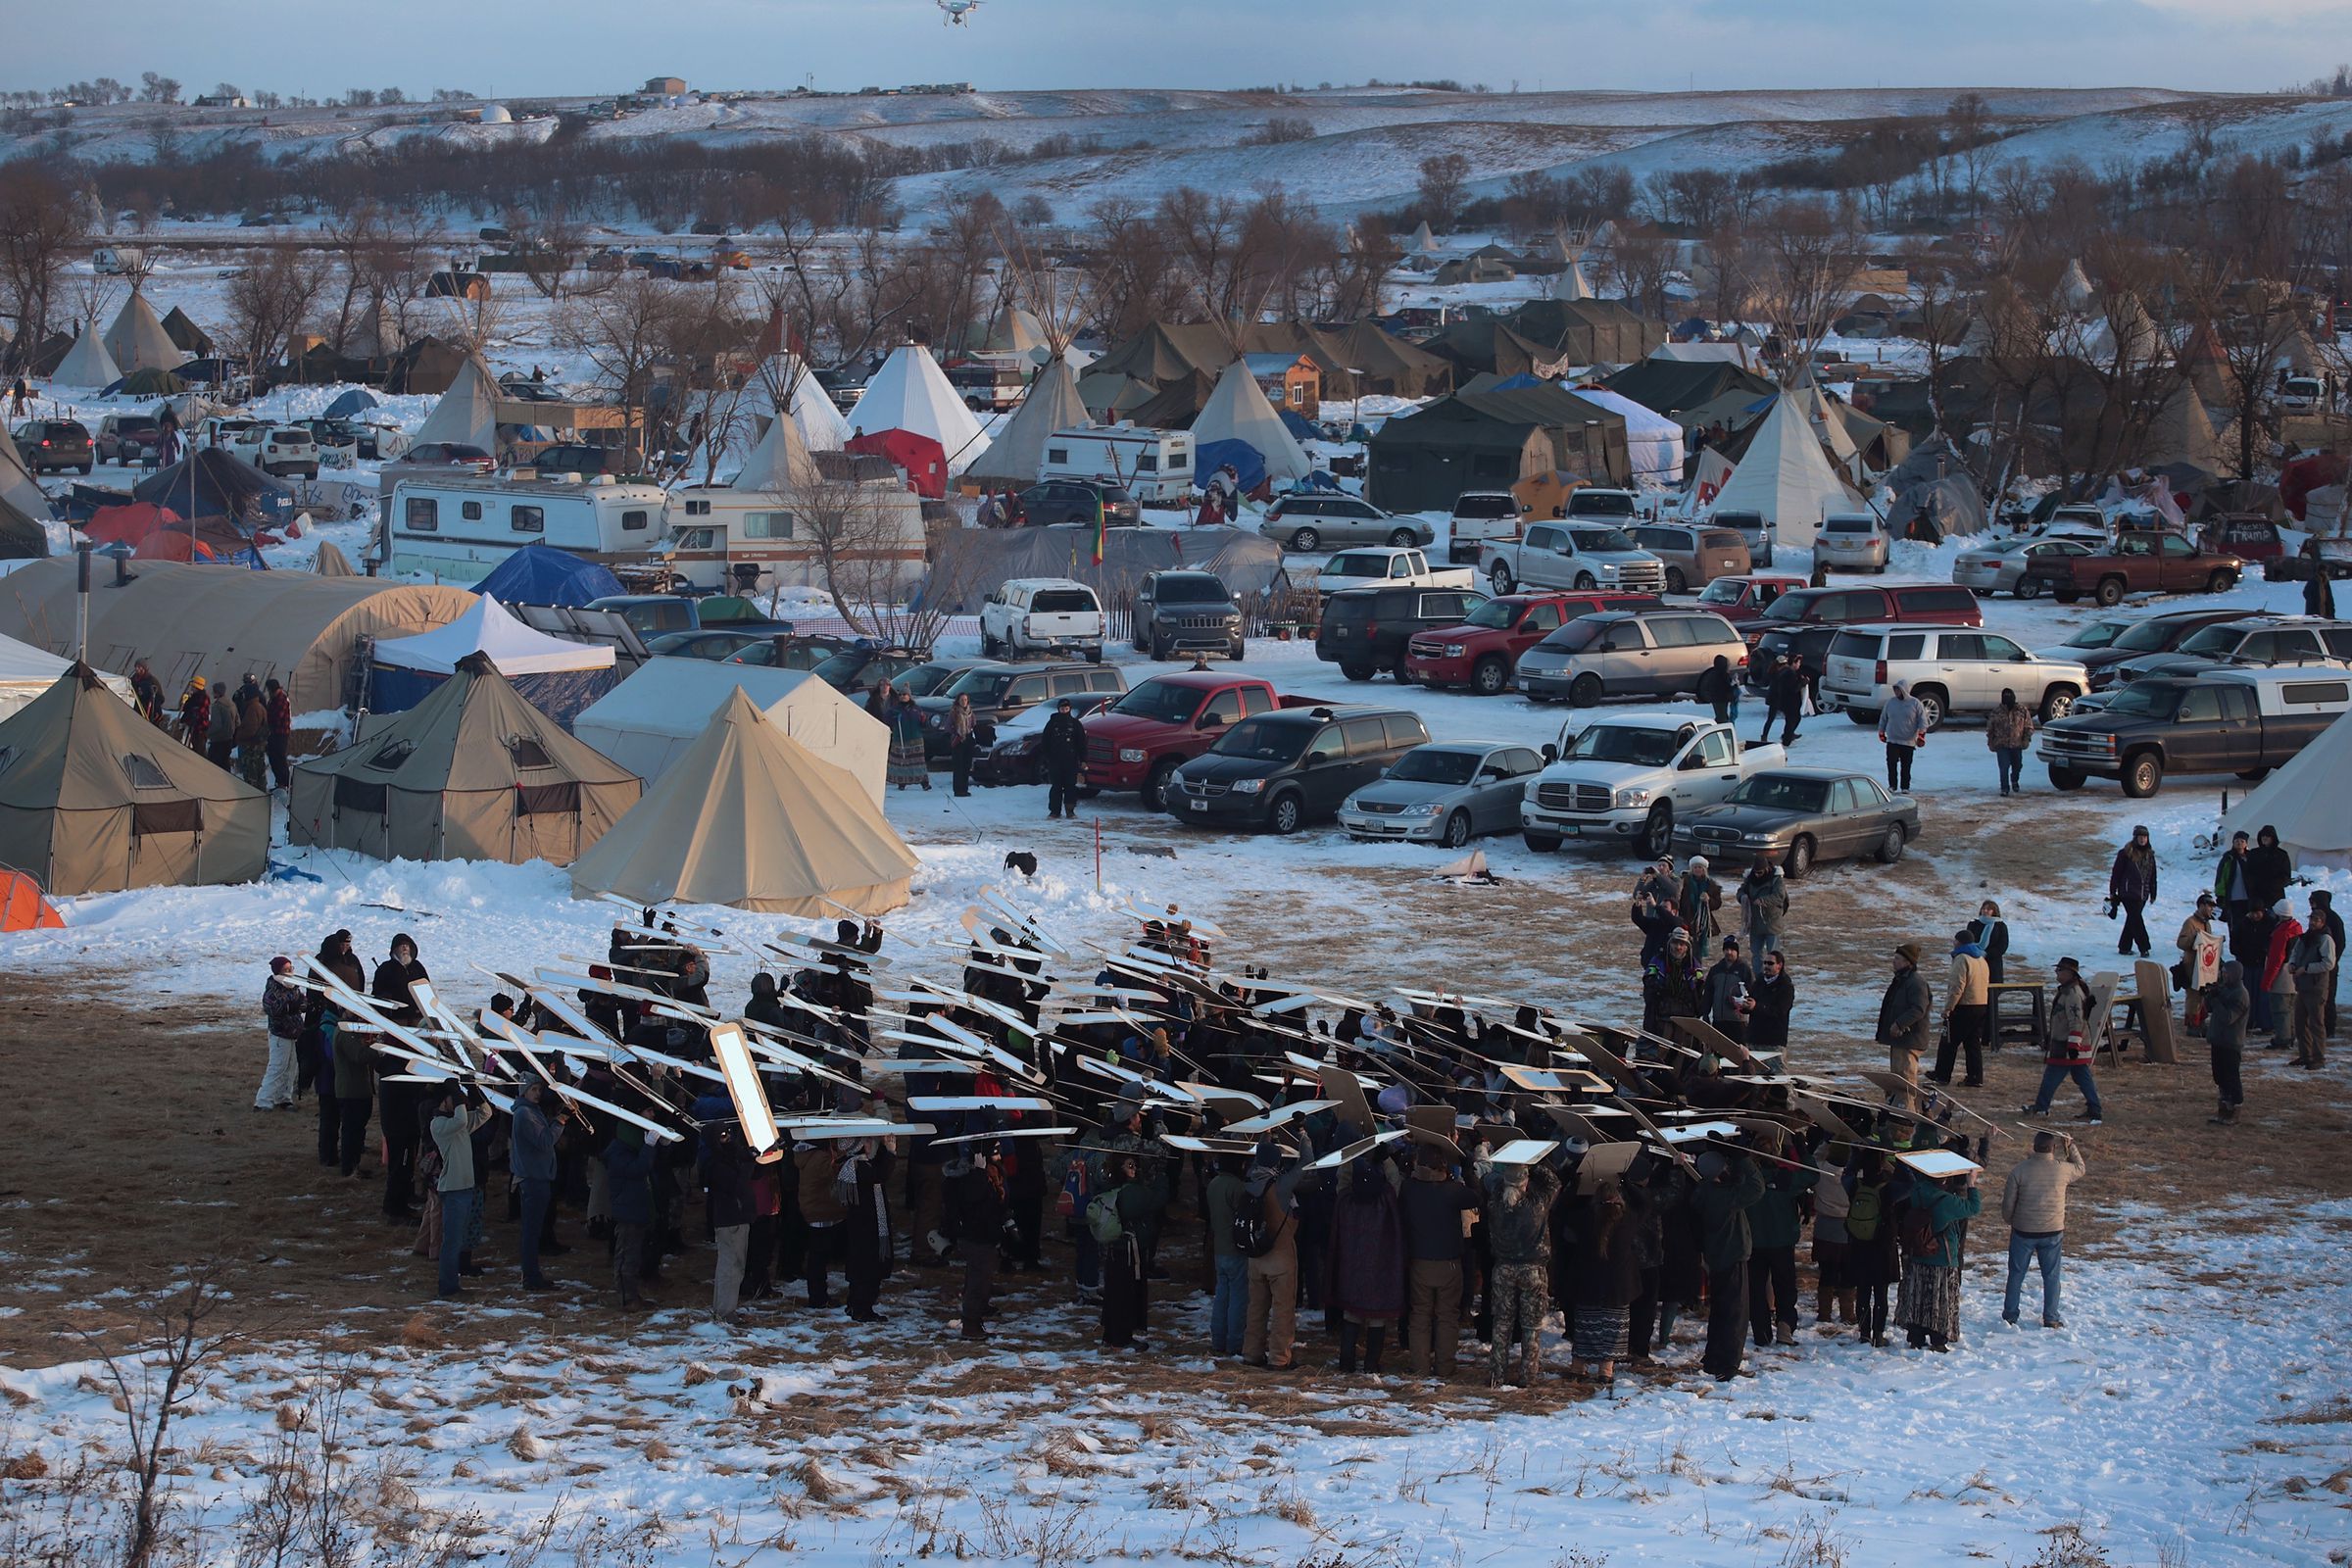 Protests Continue At Standing Rock Sioux Reservation Over Dakota Pipeline Access Project